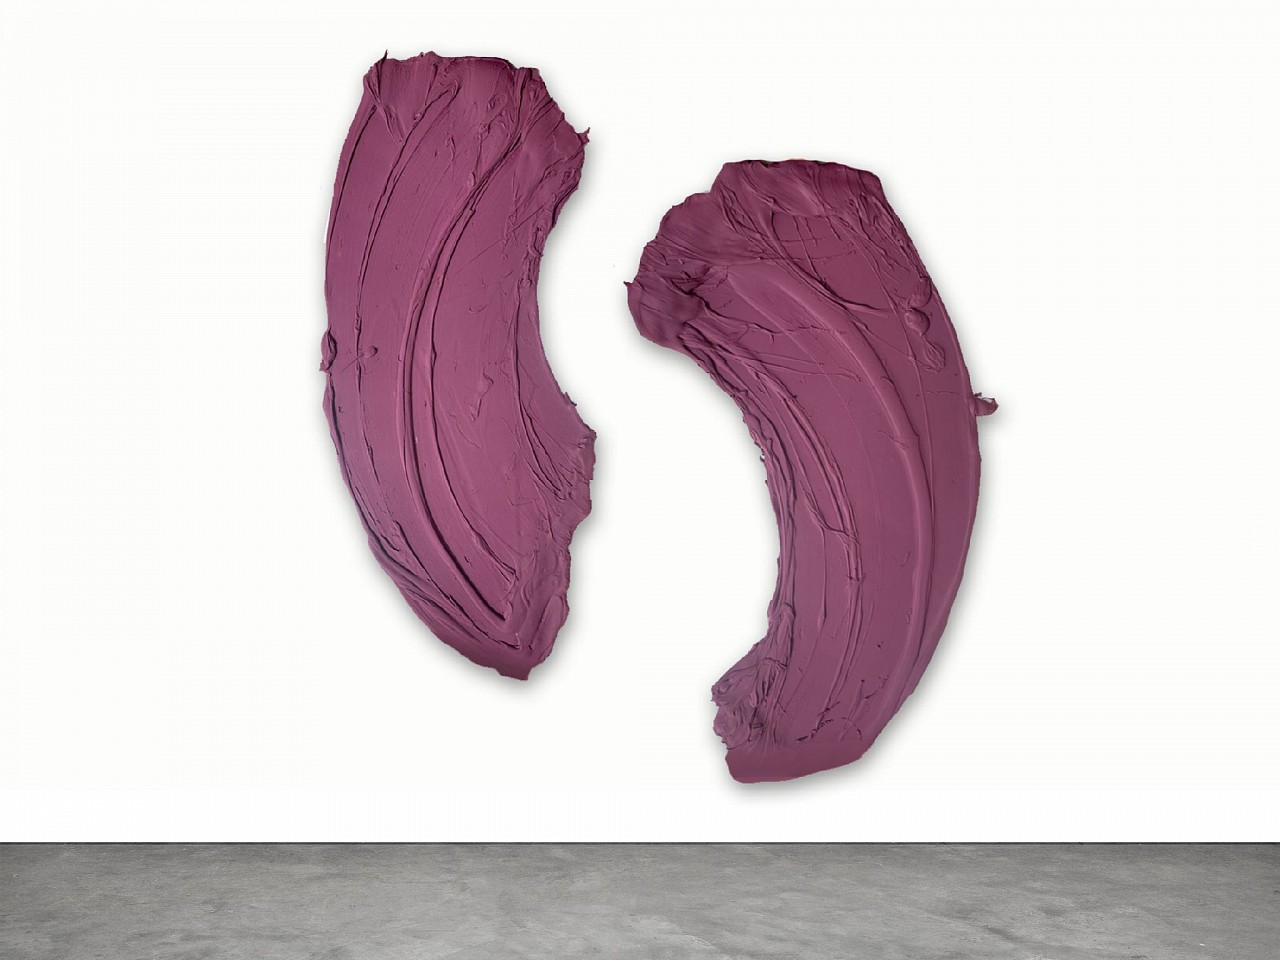 Donald Martiny, Mawakawa, 2013
polymer and pigment on aluminum, Left panel 96 x 55 inches / Right panel 103 x 62 inches each
MART00136